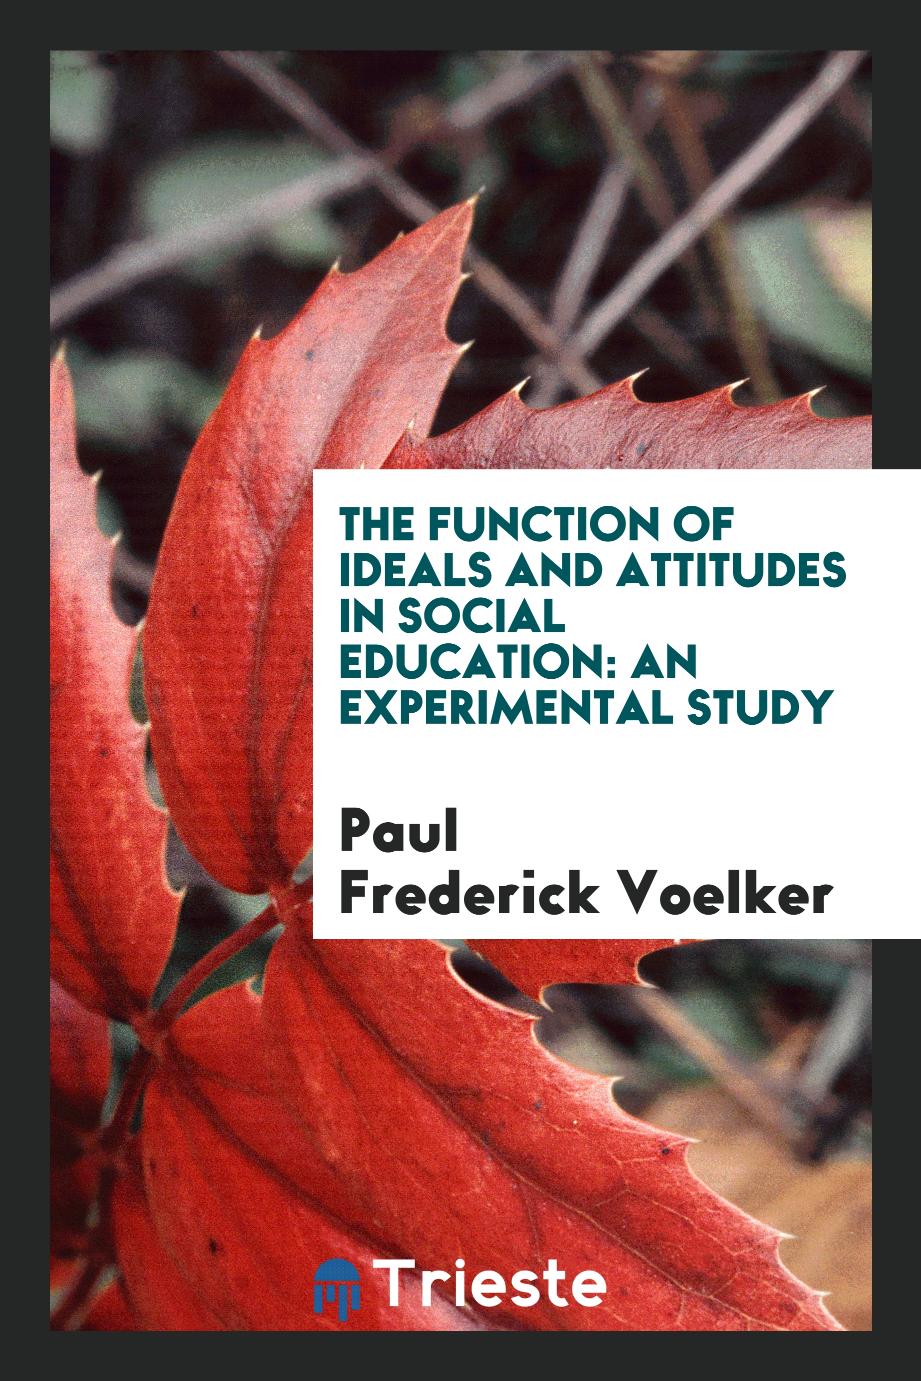 The Function of Ideals and Attitudes in Social Education: An Experimental Study